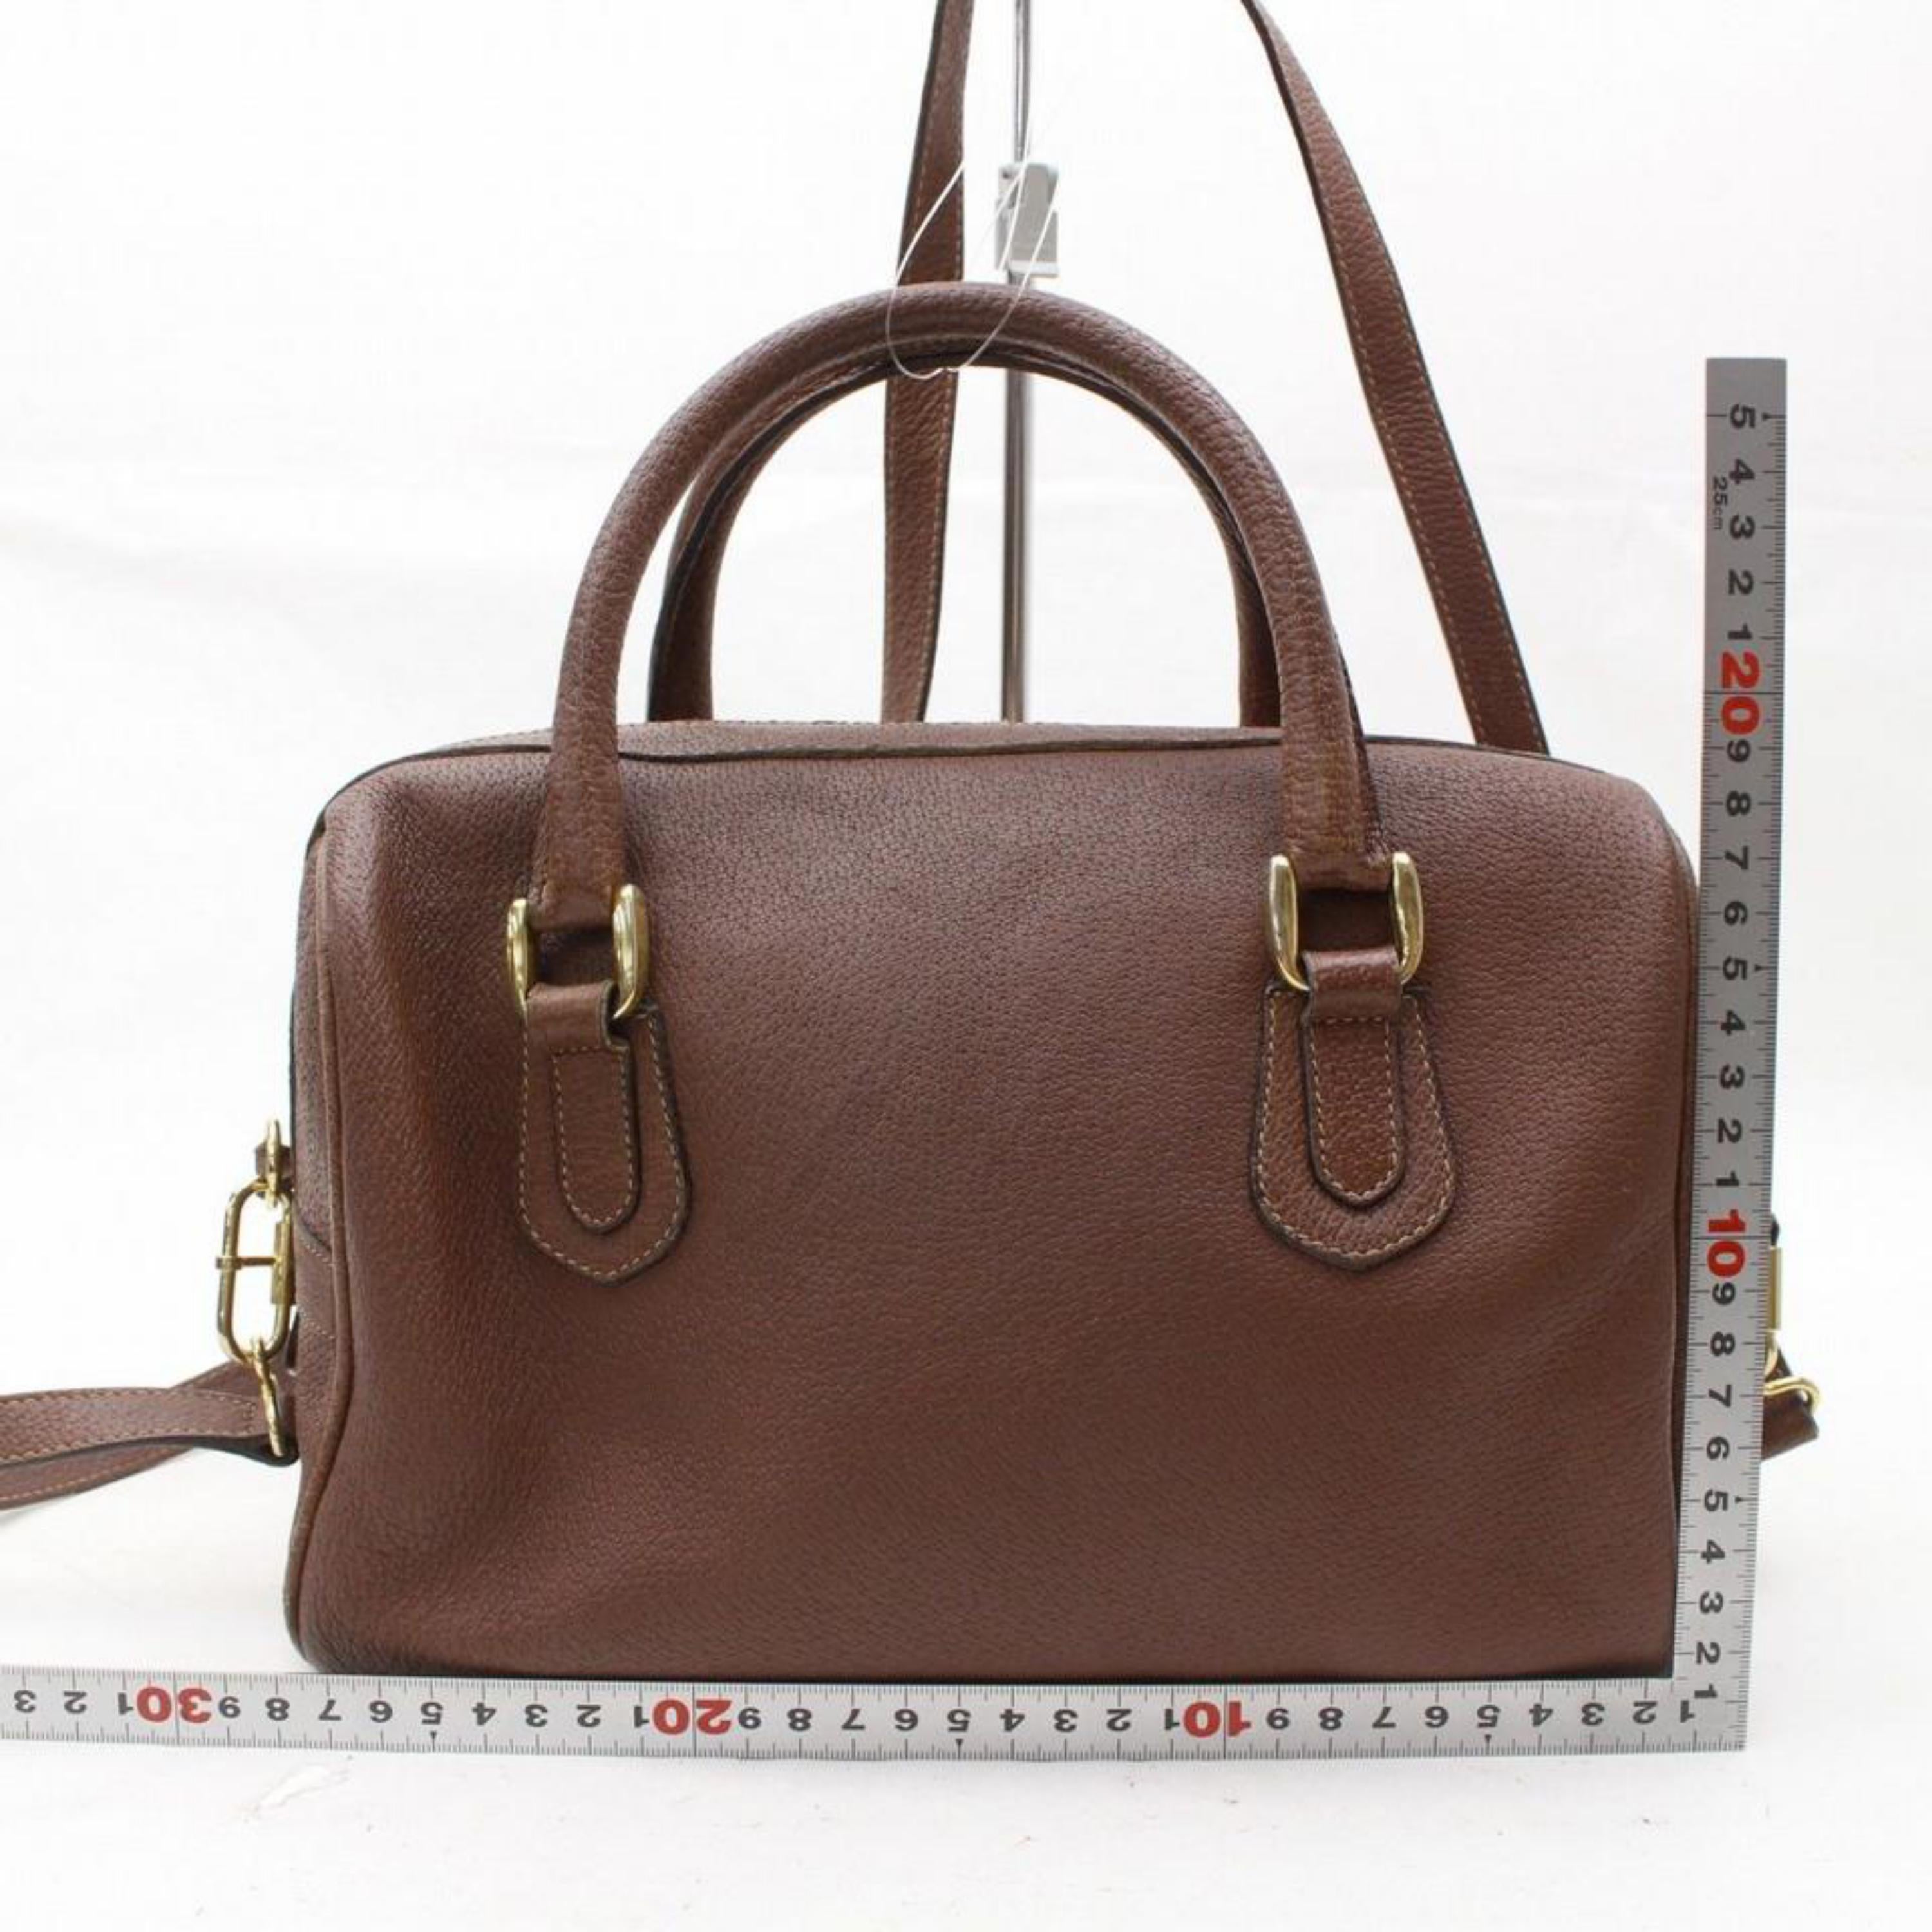 Gucci Boston With Strap 868550 Brown Leather Shoulder Bag For Sale 2